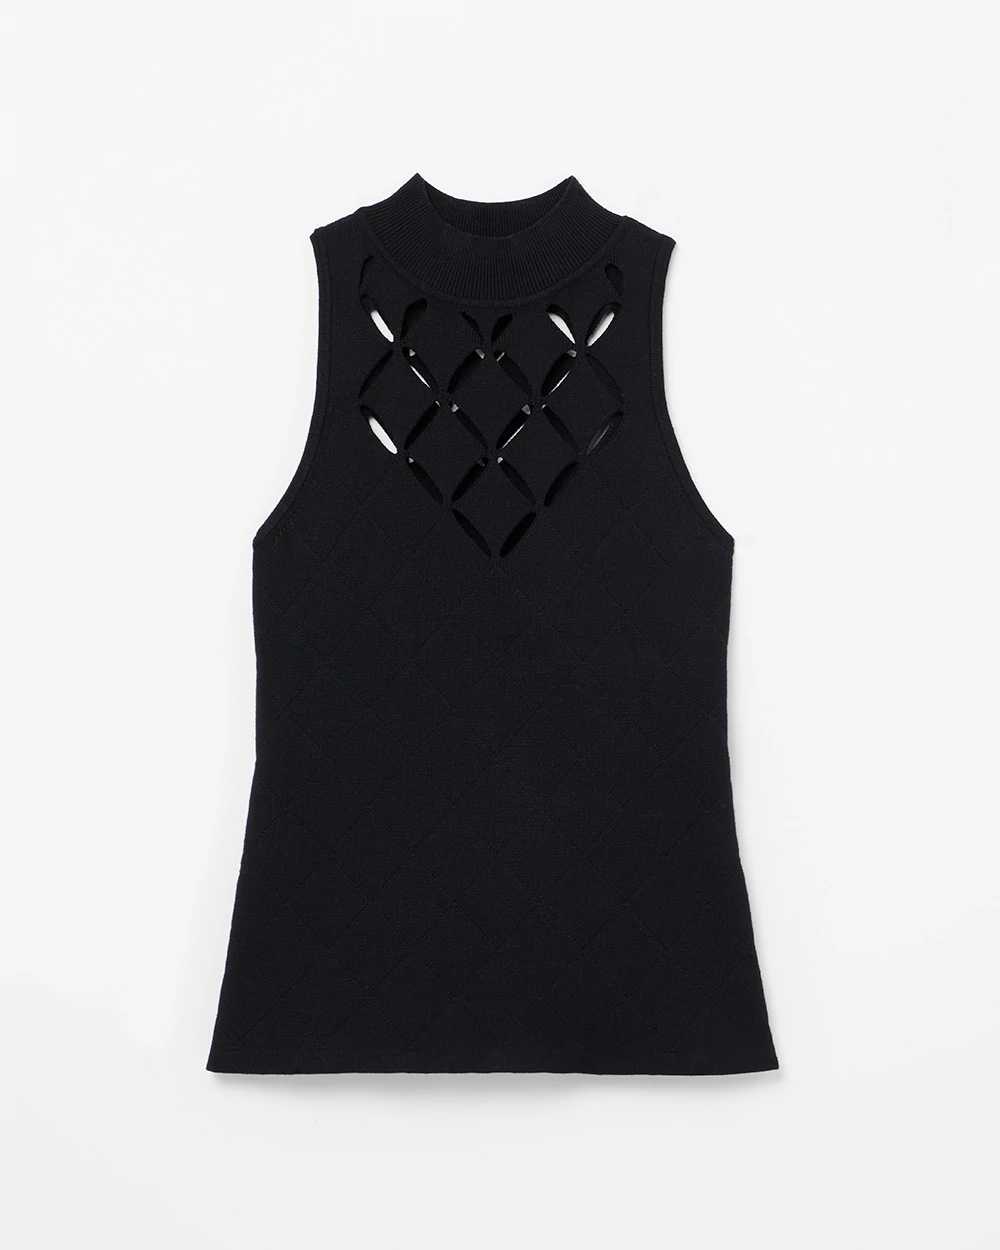 Diamond Cutwork Tank click to view larger image.